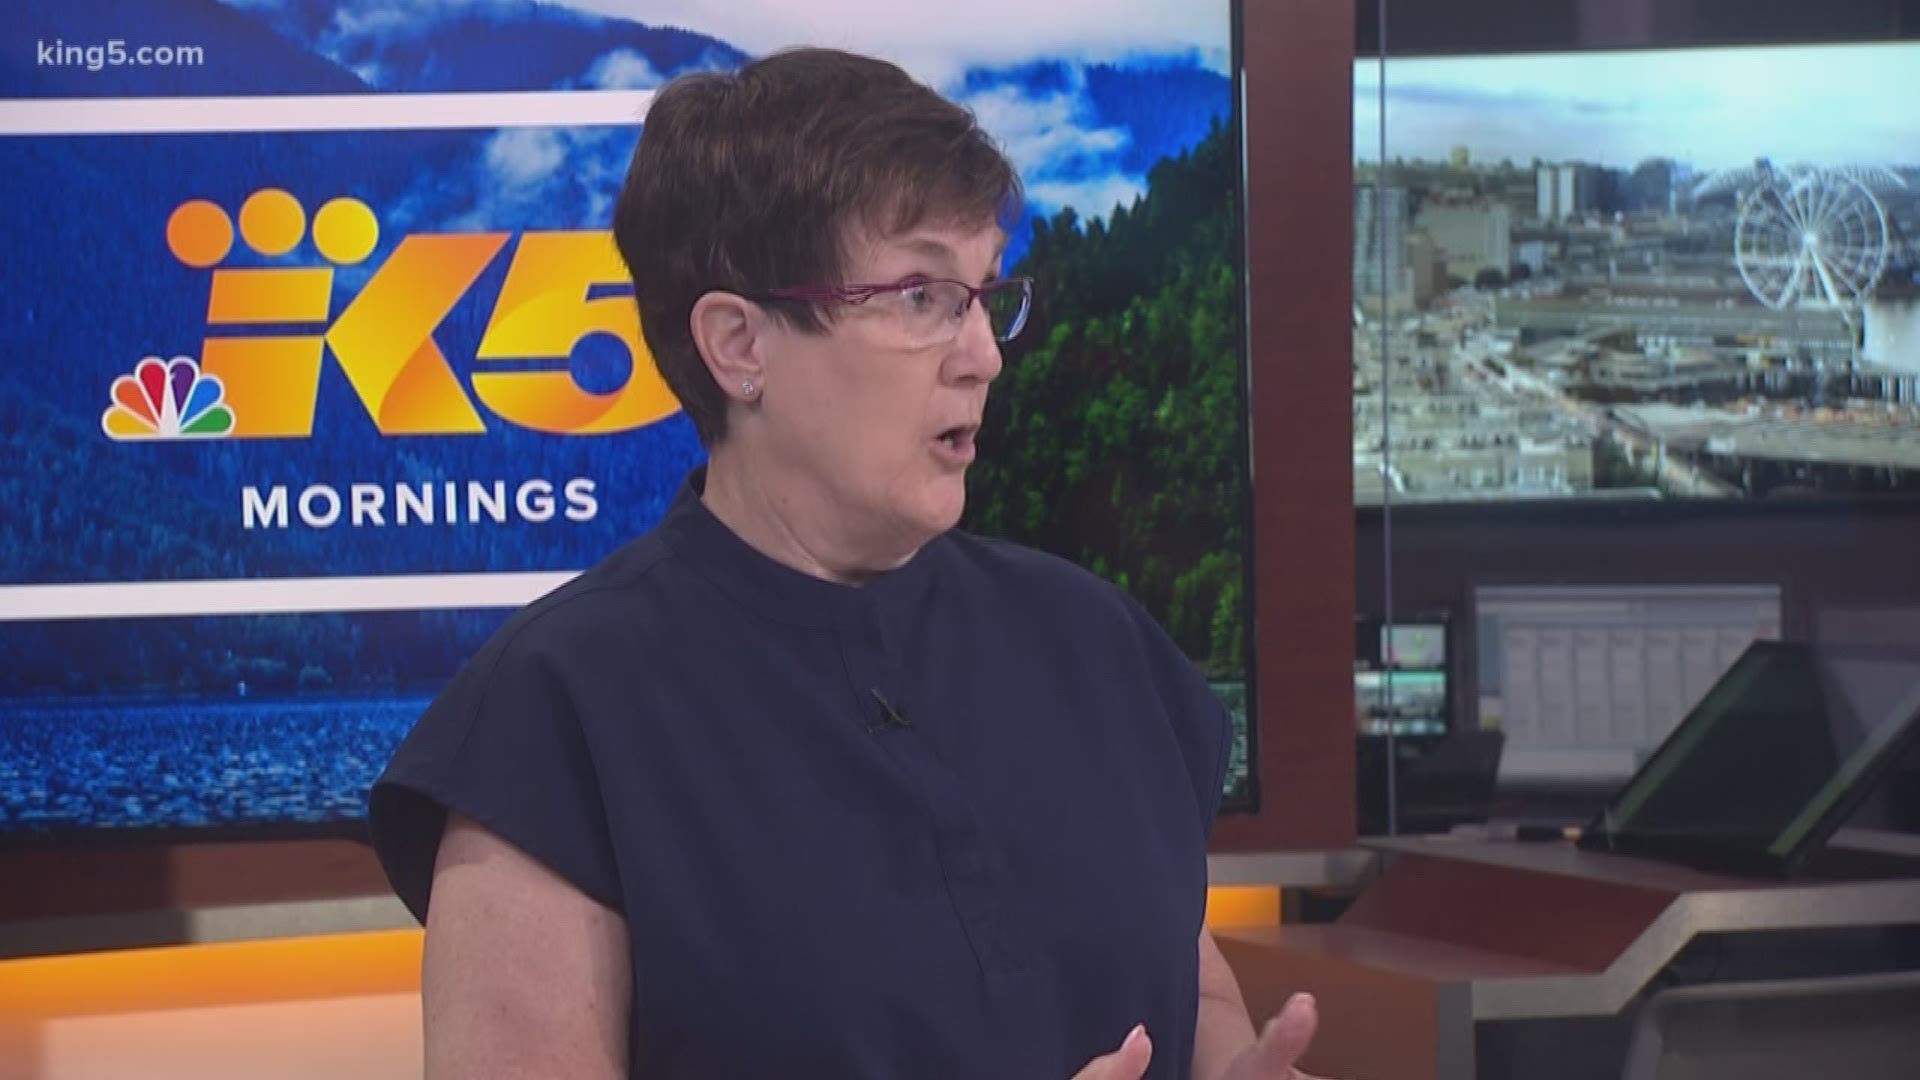 Barb Jensen, RN, CHEP, manager of trauma services at Kirkland-based EvergreenHealth, shares emergency preparedness tips and how to stay safe in the event of a natural disaster or other major emergency.